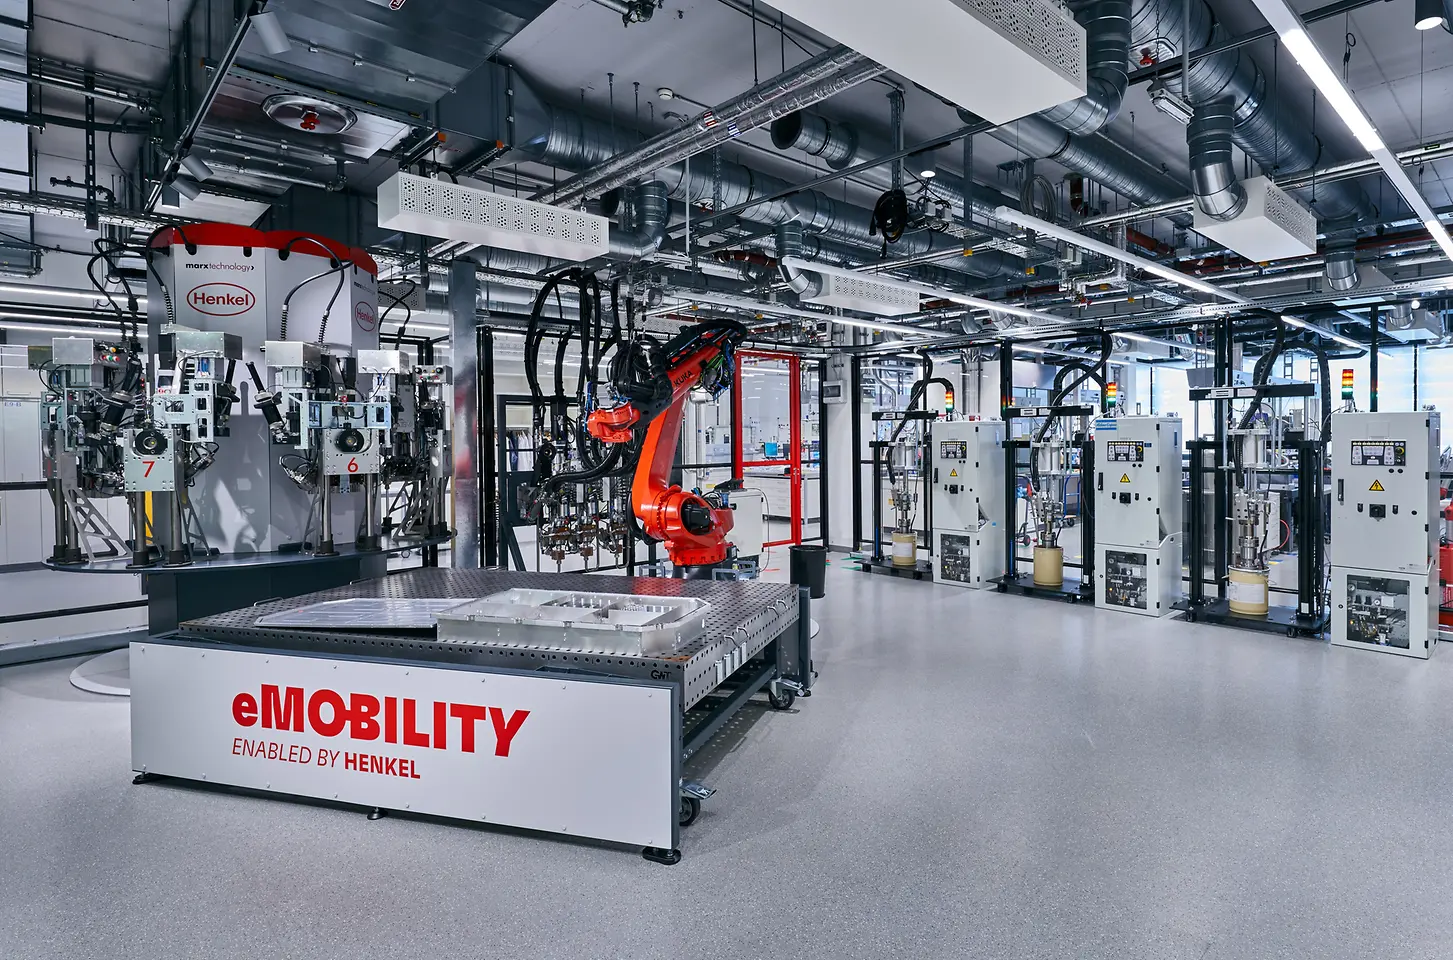 
Henkel’s Battery Engineering Center has been specifically designed and equipped to serve as an innovation hub for EV battery technology.